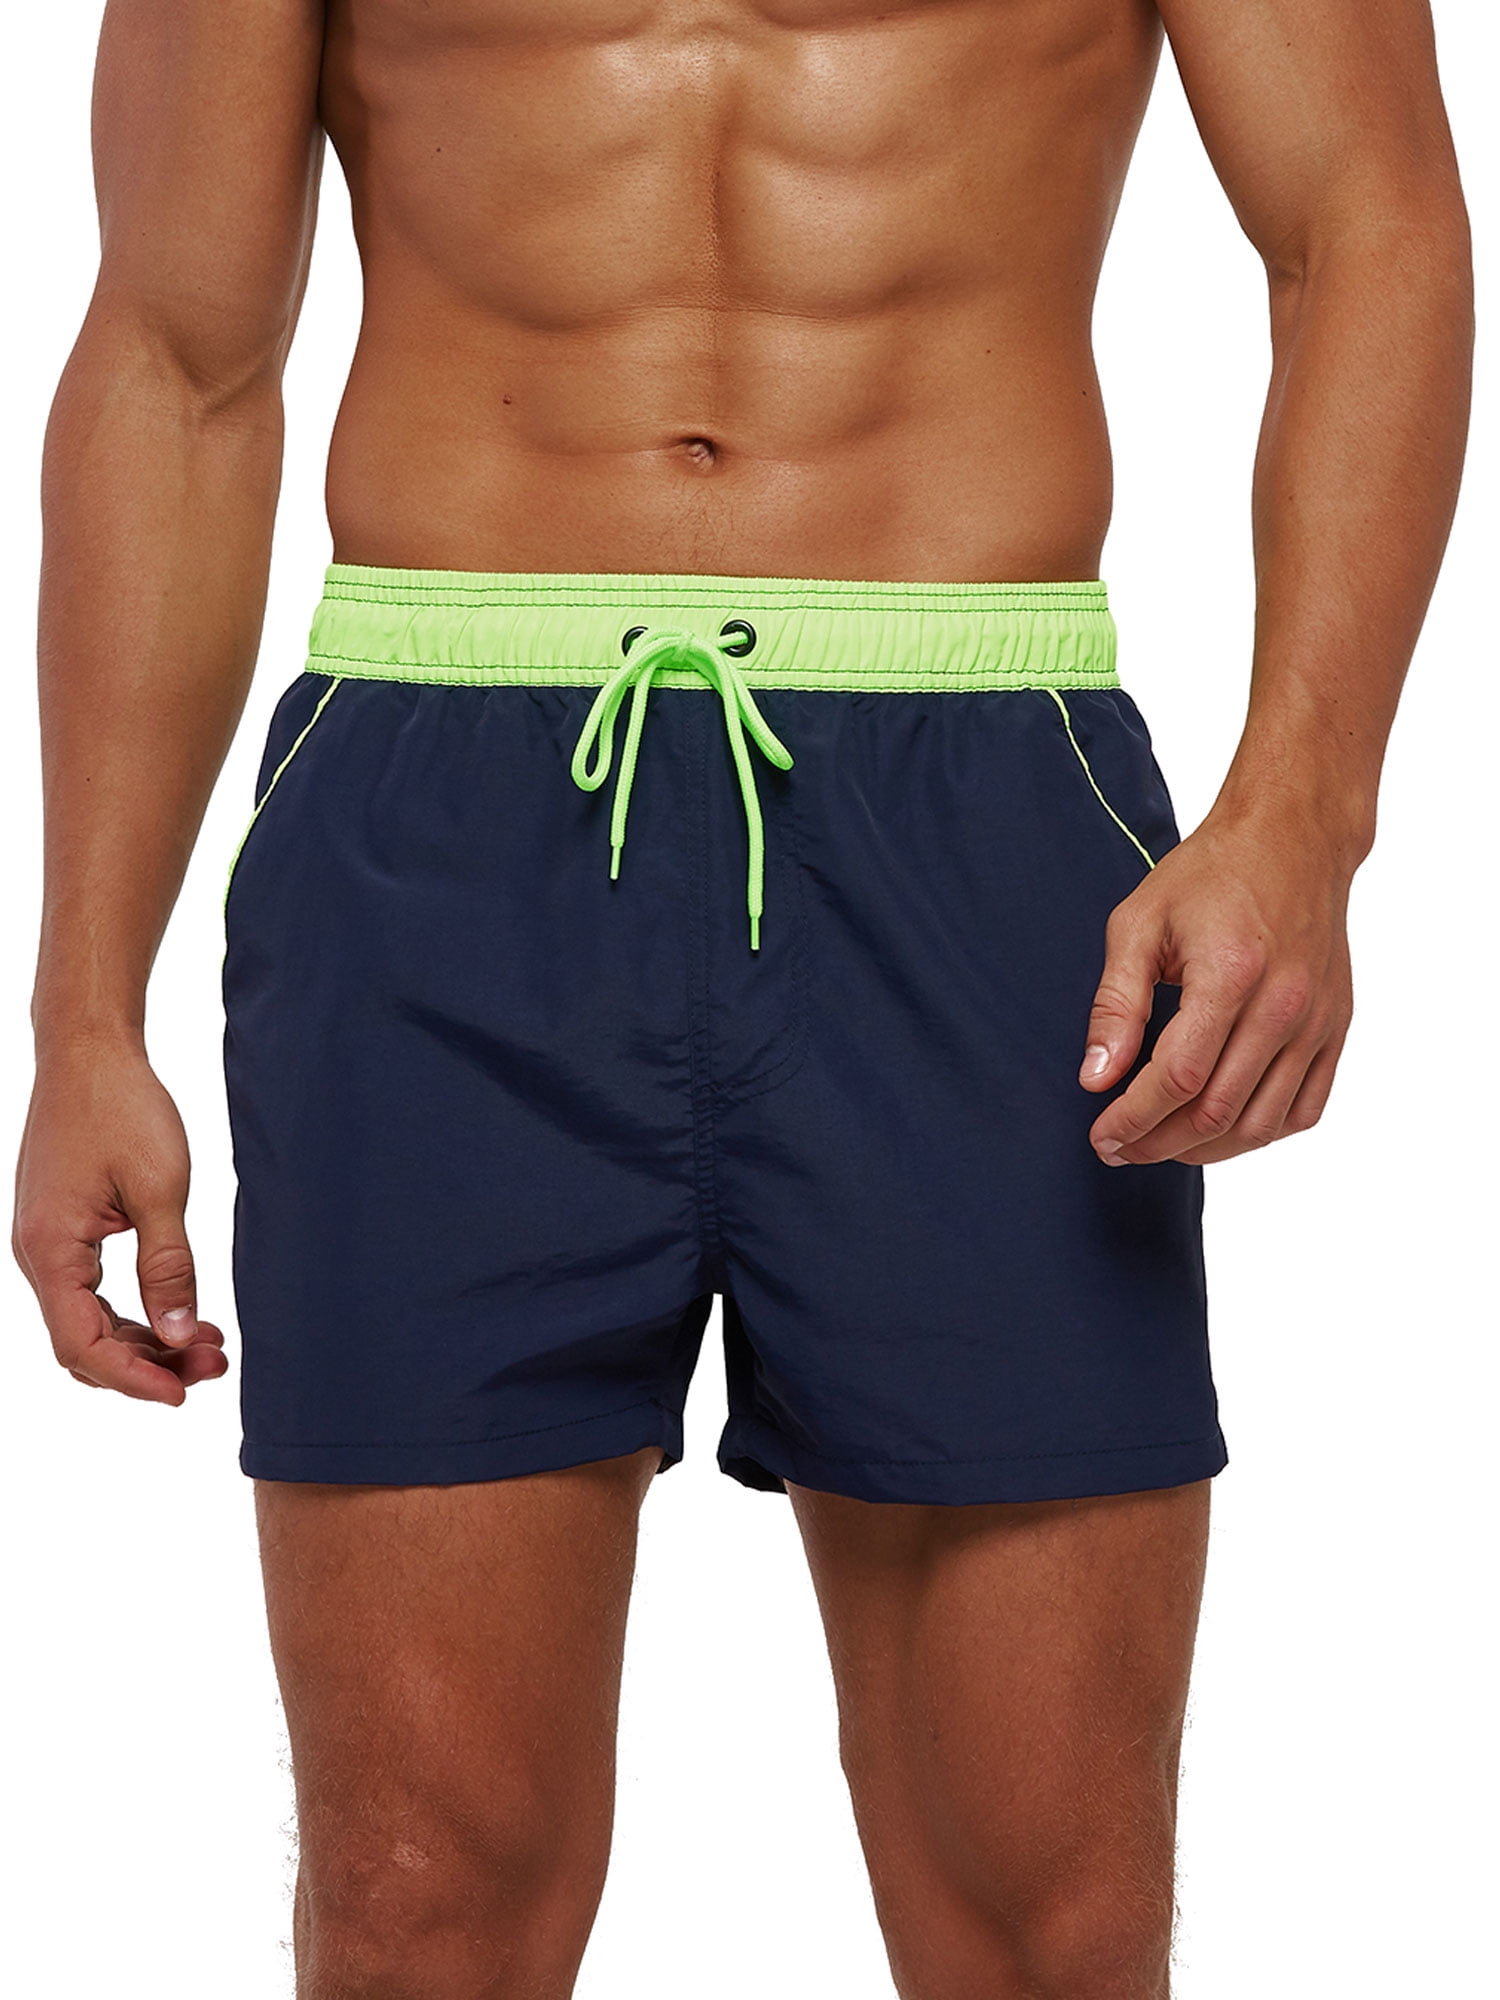 Men Swimming Shorts Causal Elasticated Cotton Summer Multi-Color Beach Trunks 